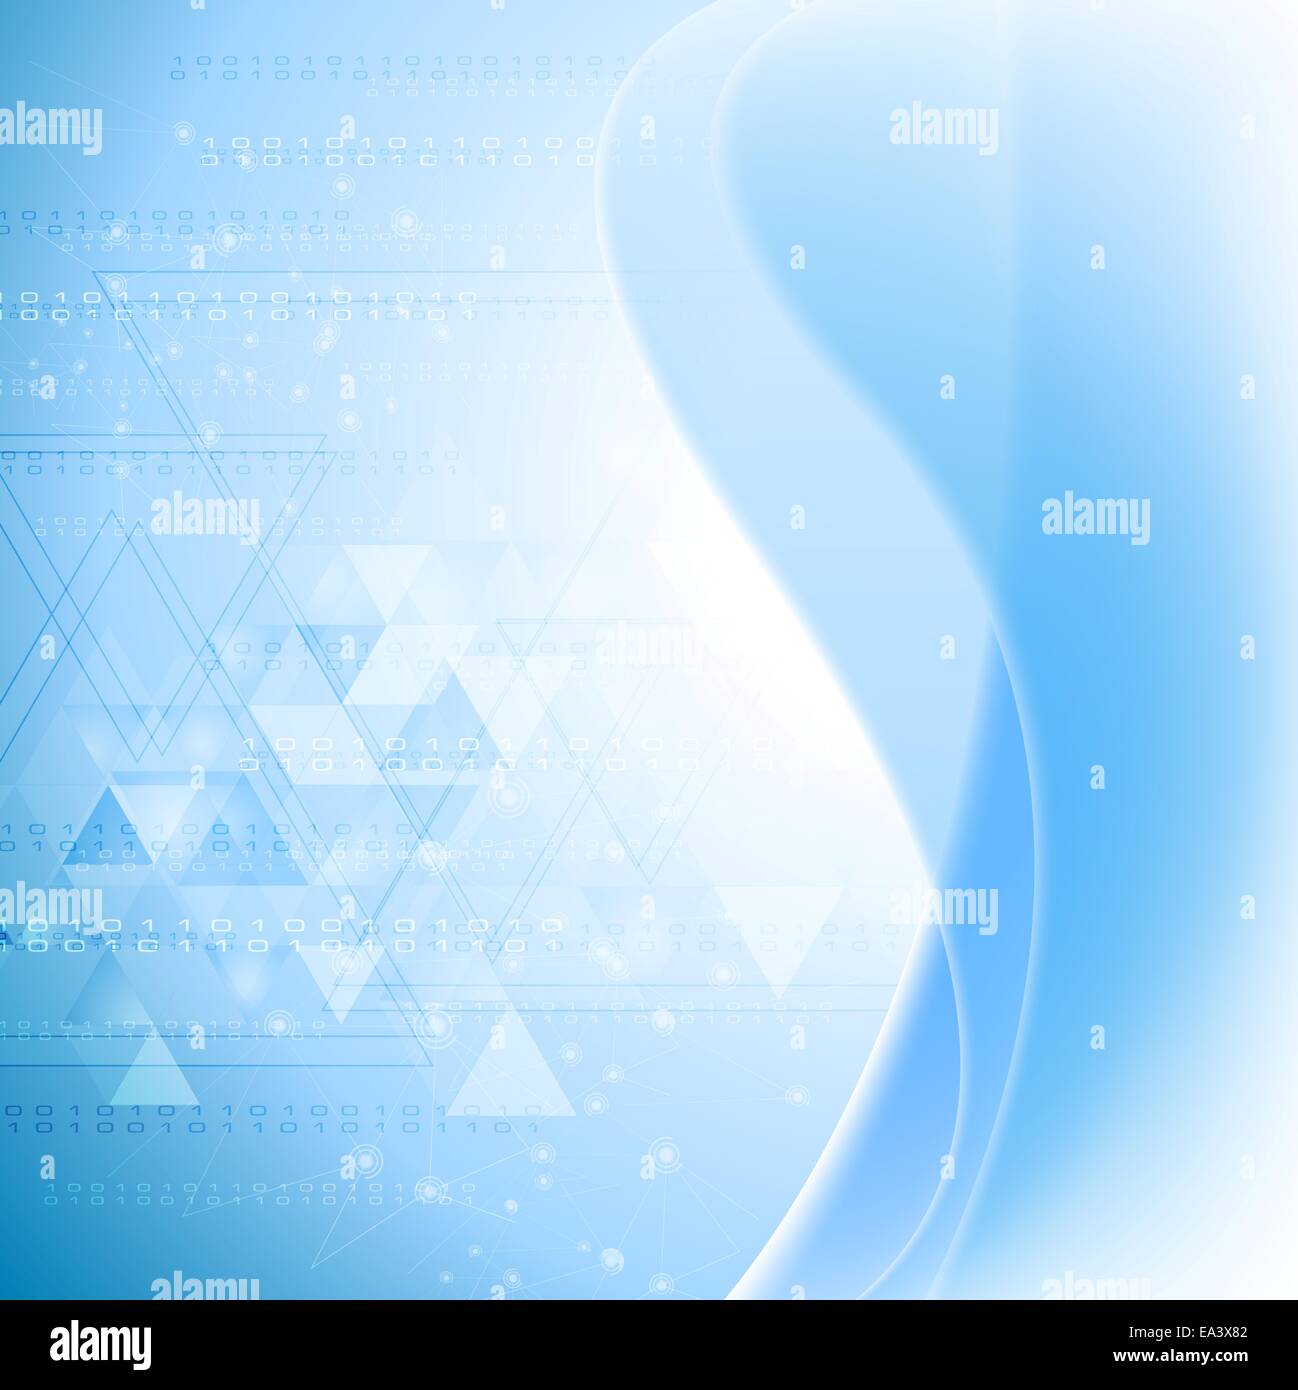 Abstract wavy tech background. Gradient mesh Stock Photo